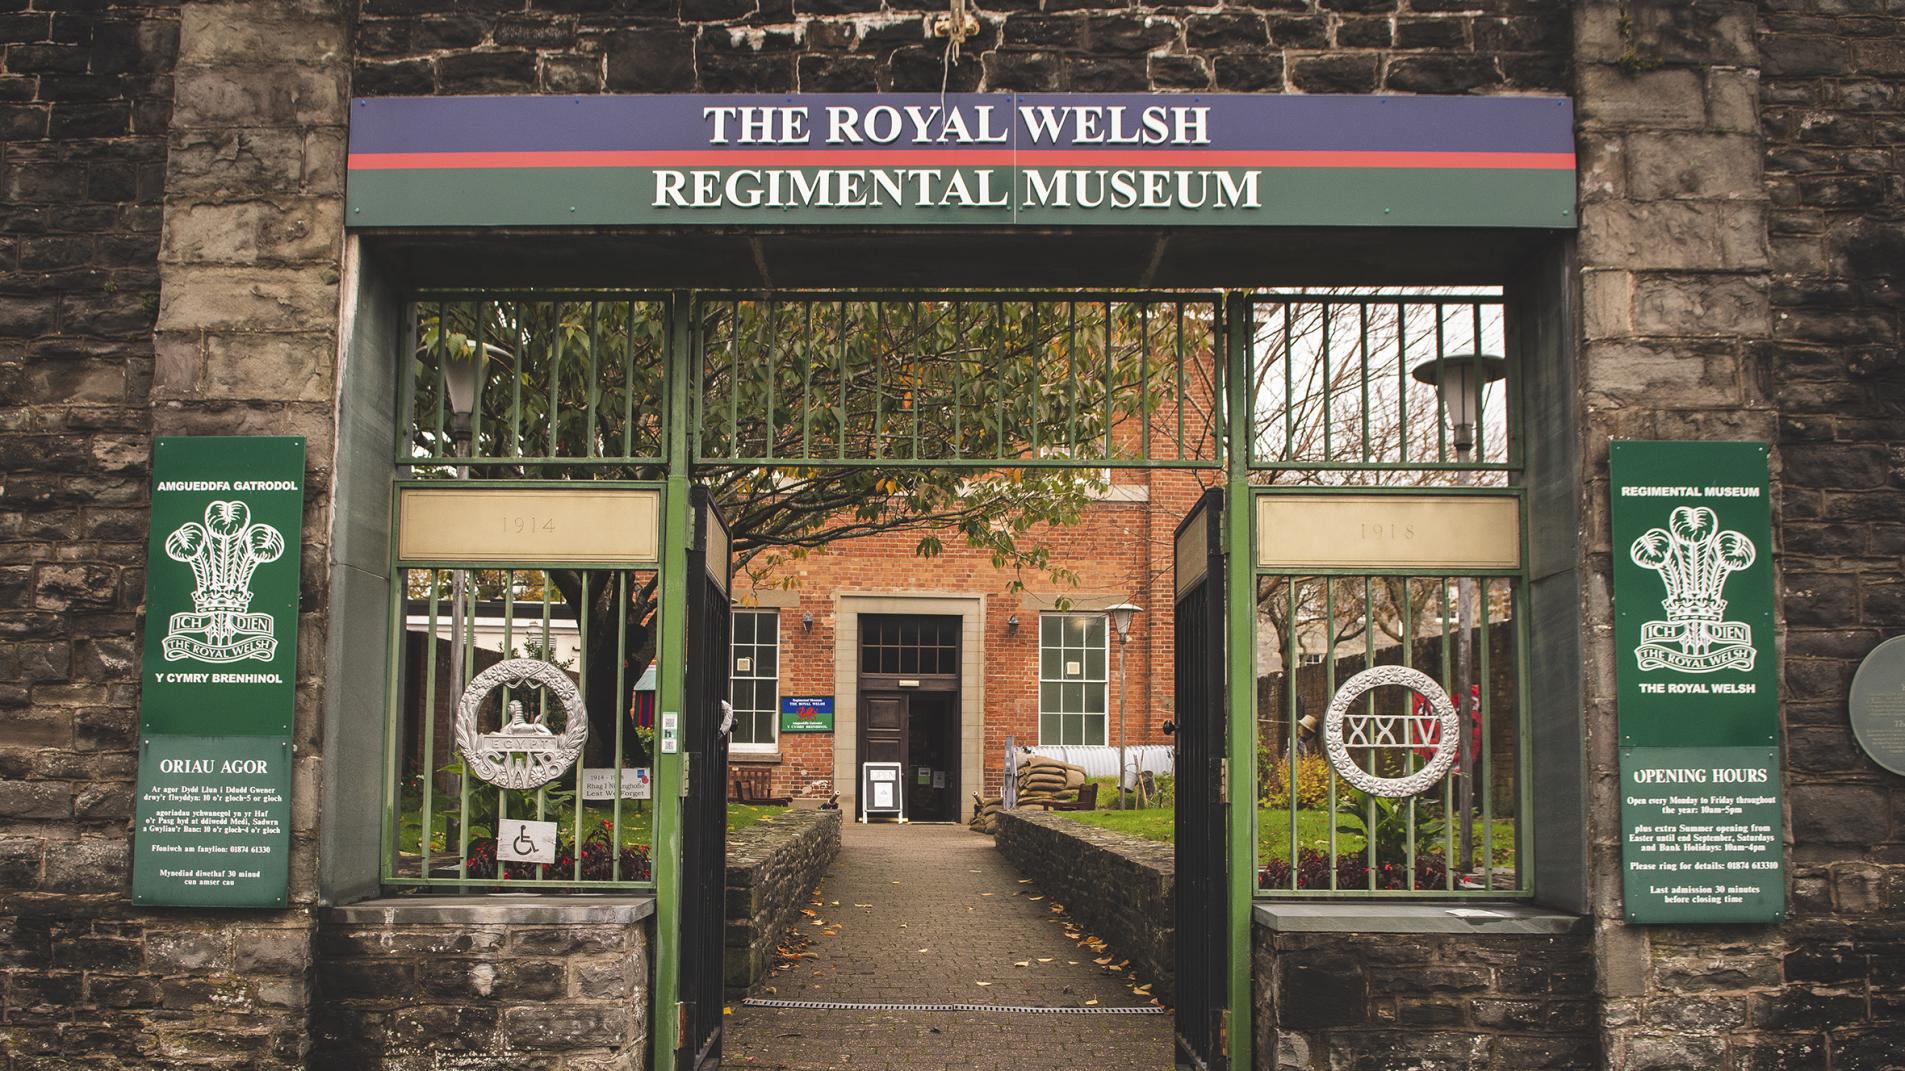 The Regimental Museum of the Royal Welsh